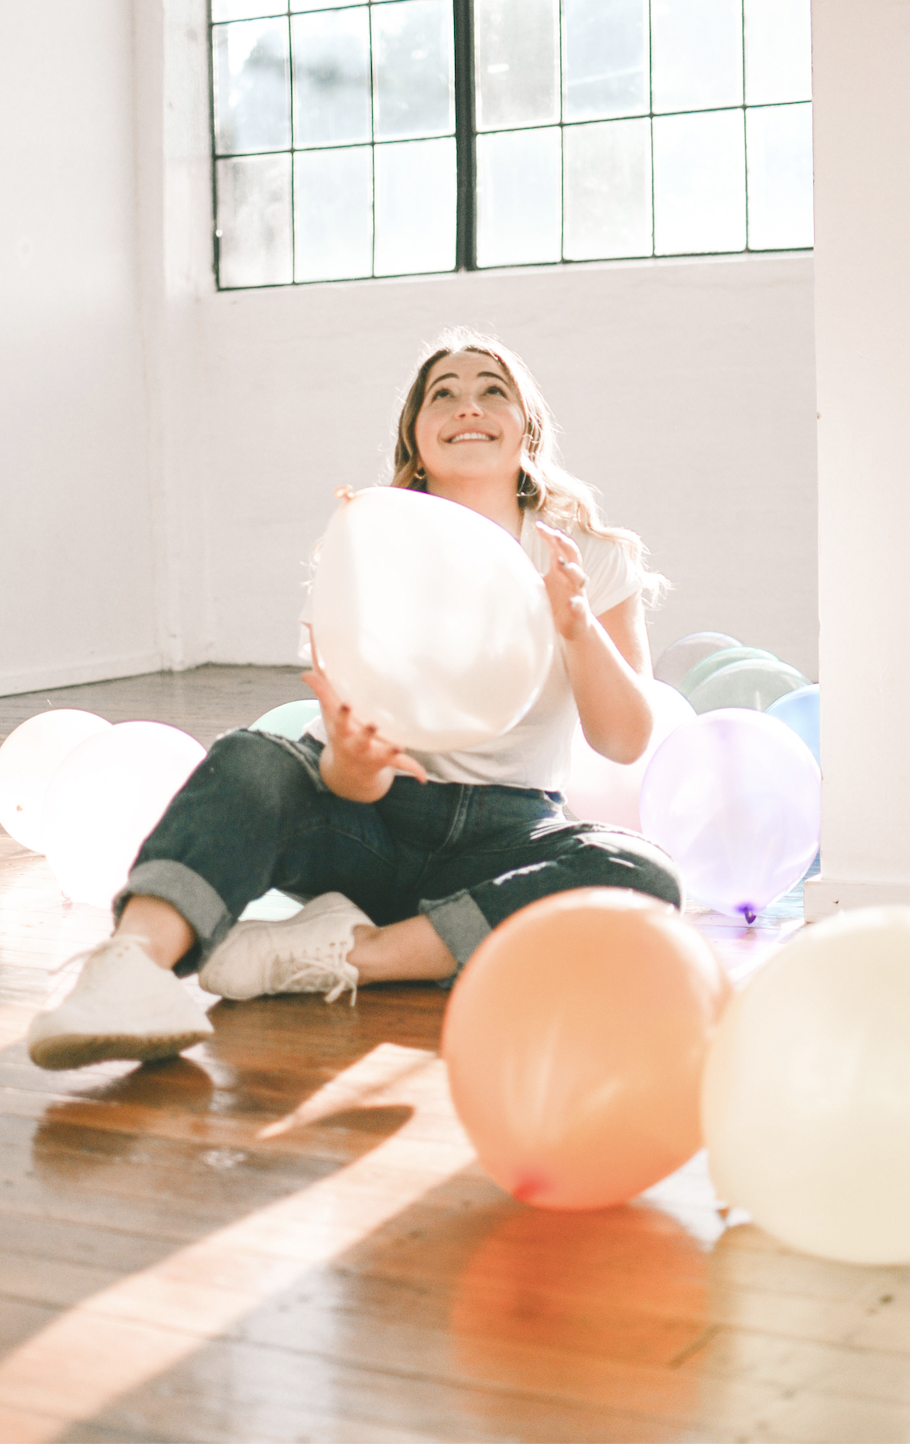 Alexandra surrounded by balloons and smiling optimistically, while she celebrates body acceptance.